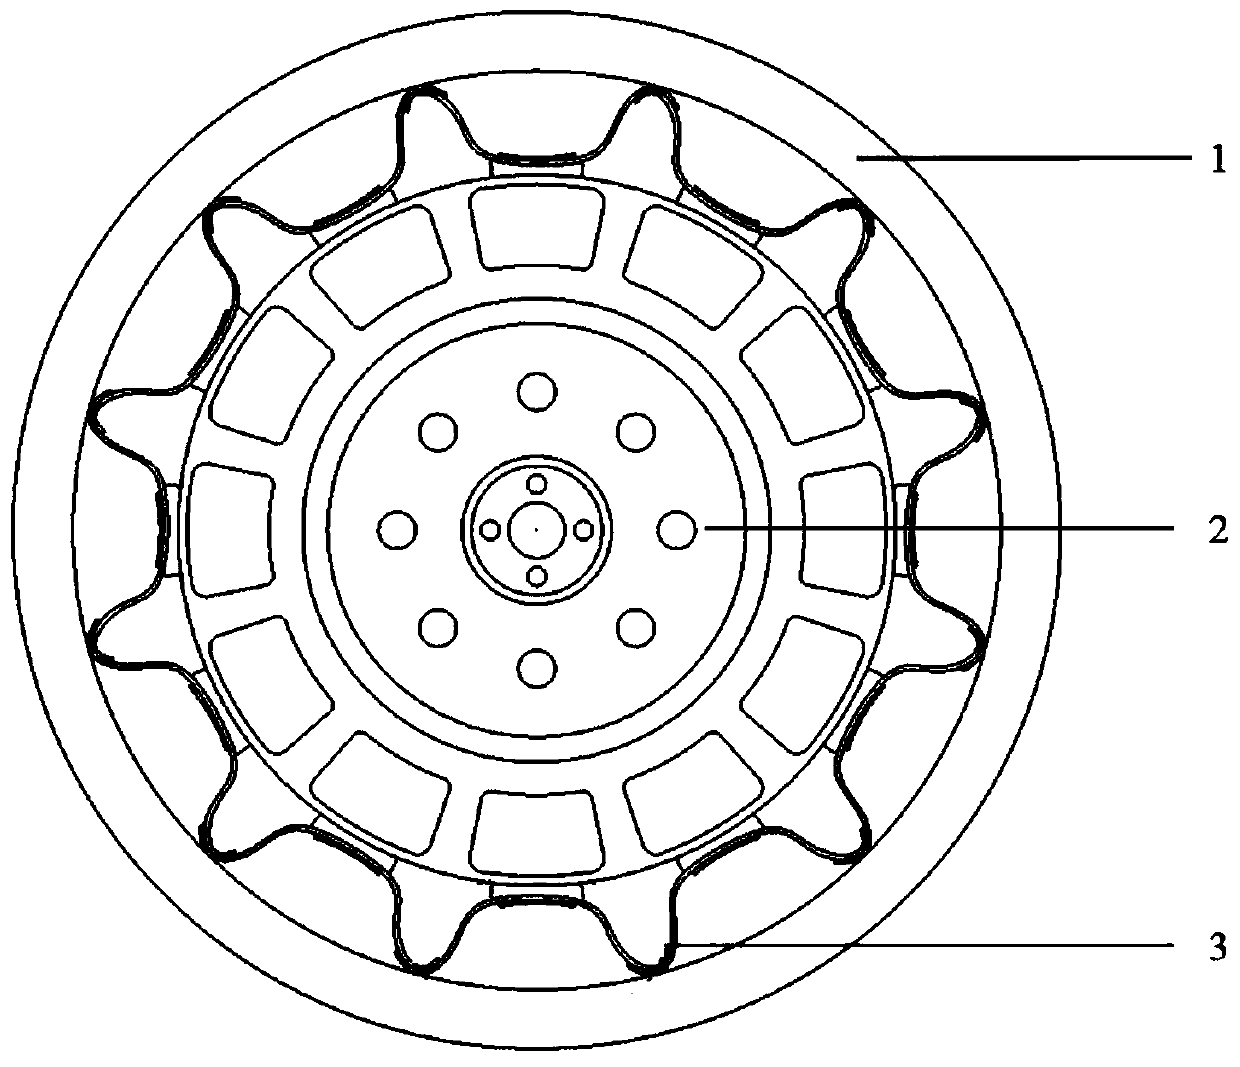 Flexible wheel with U-shaped metal elastic supporting body